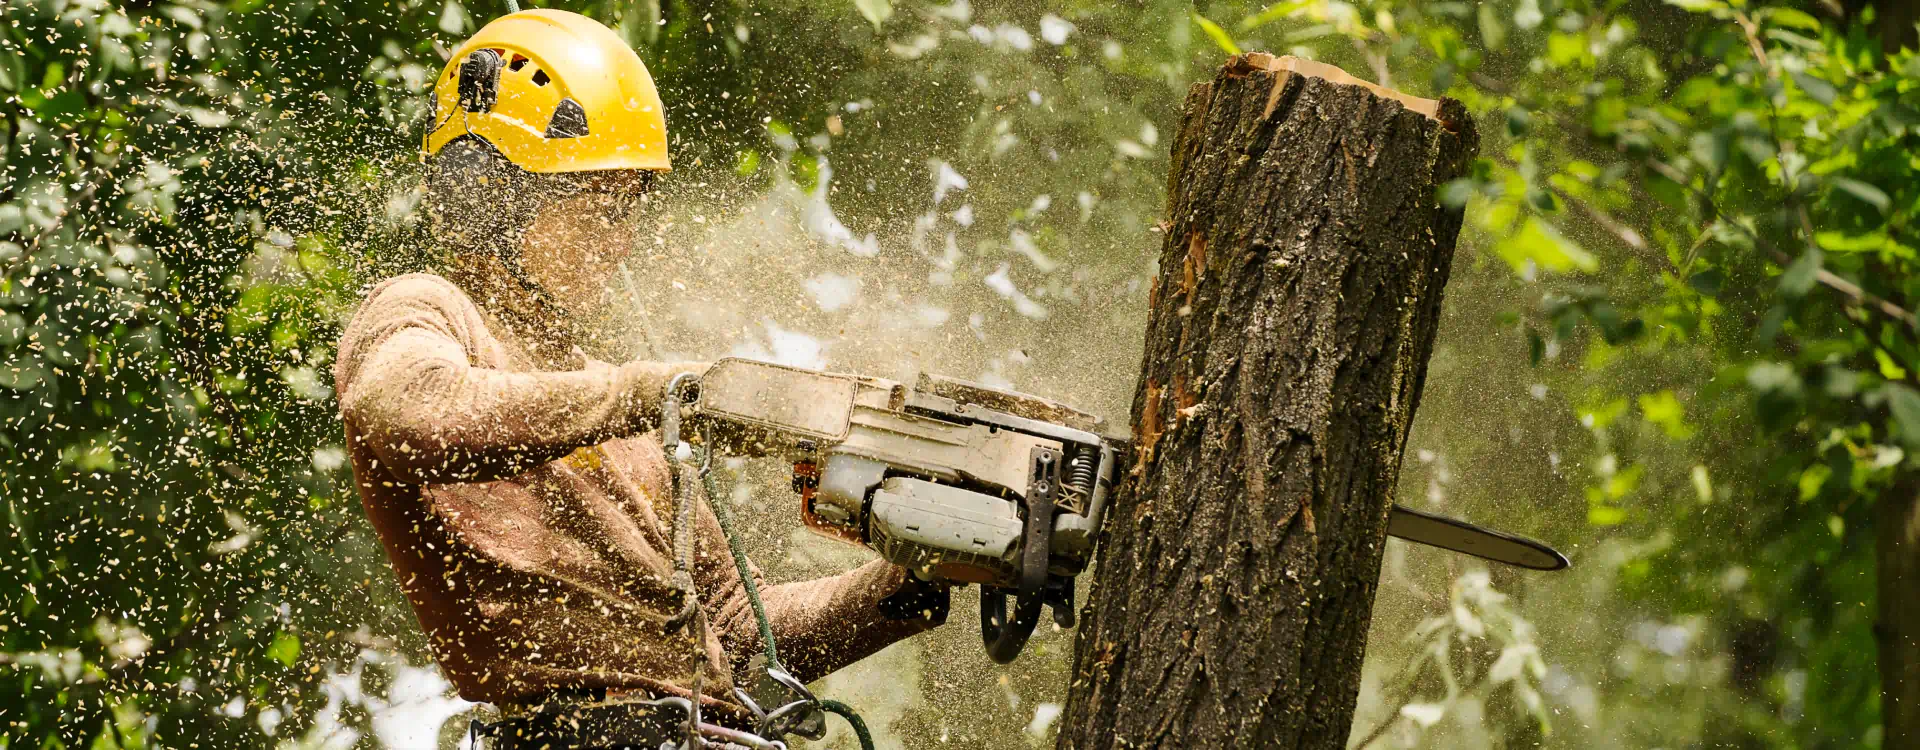 tree cutting with a chansaw